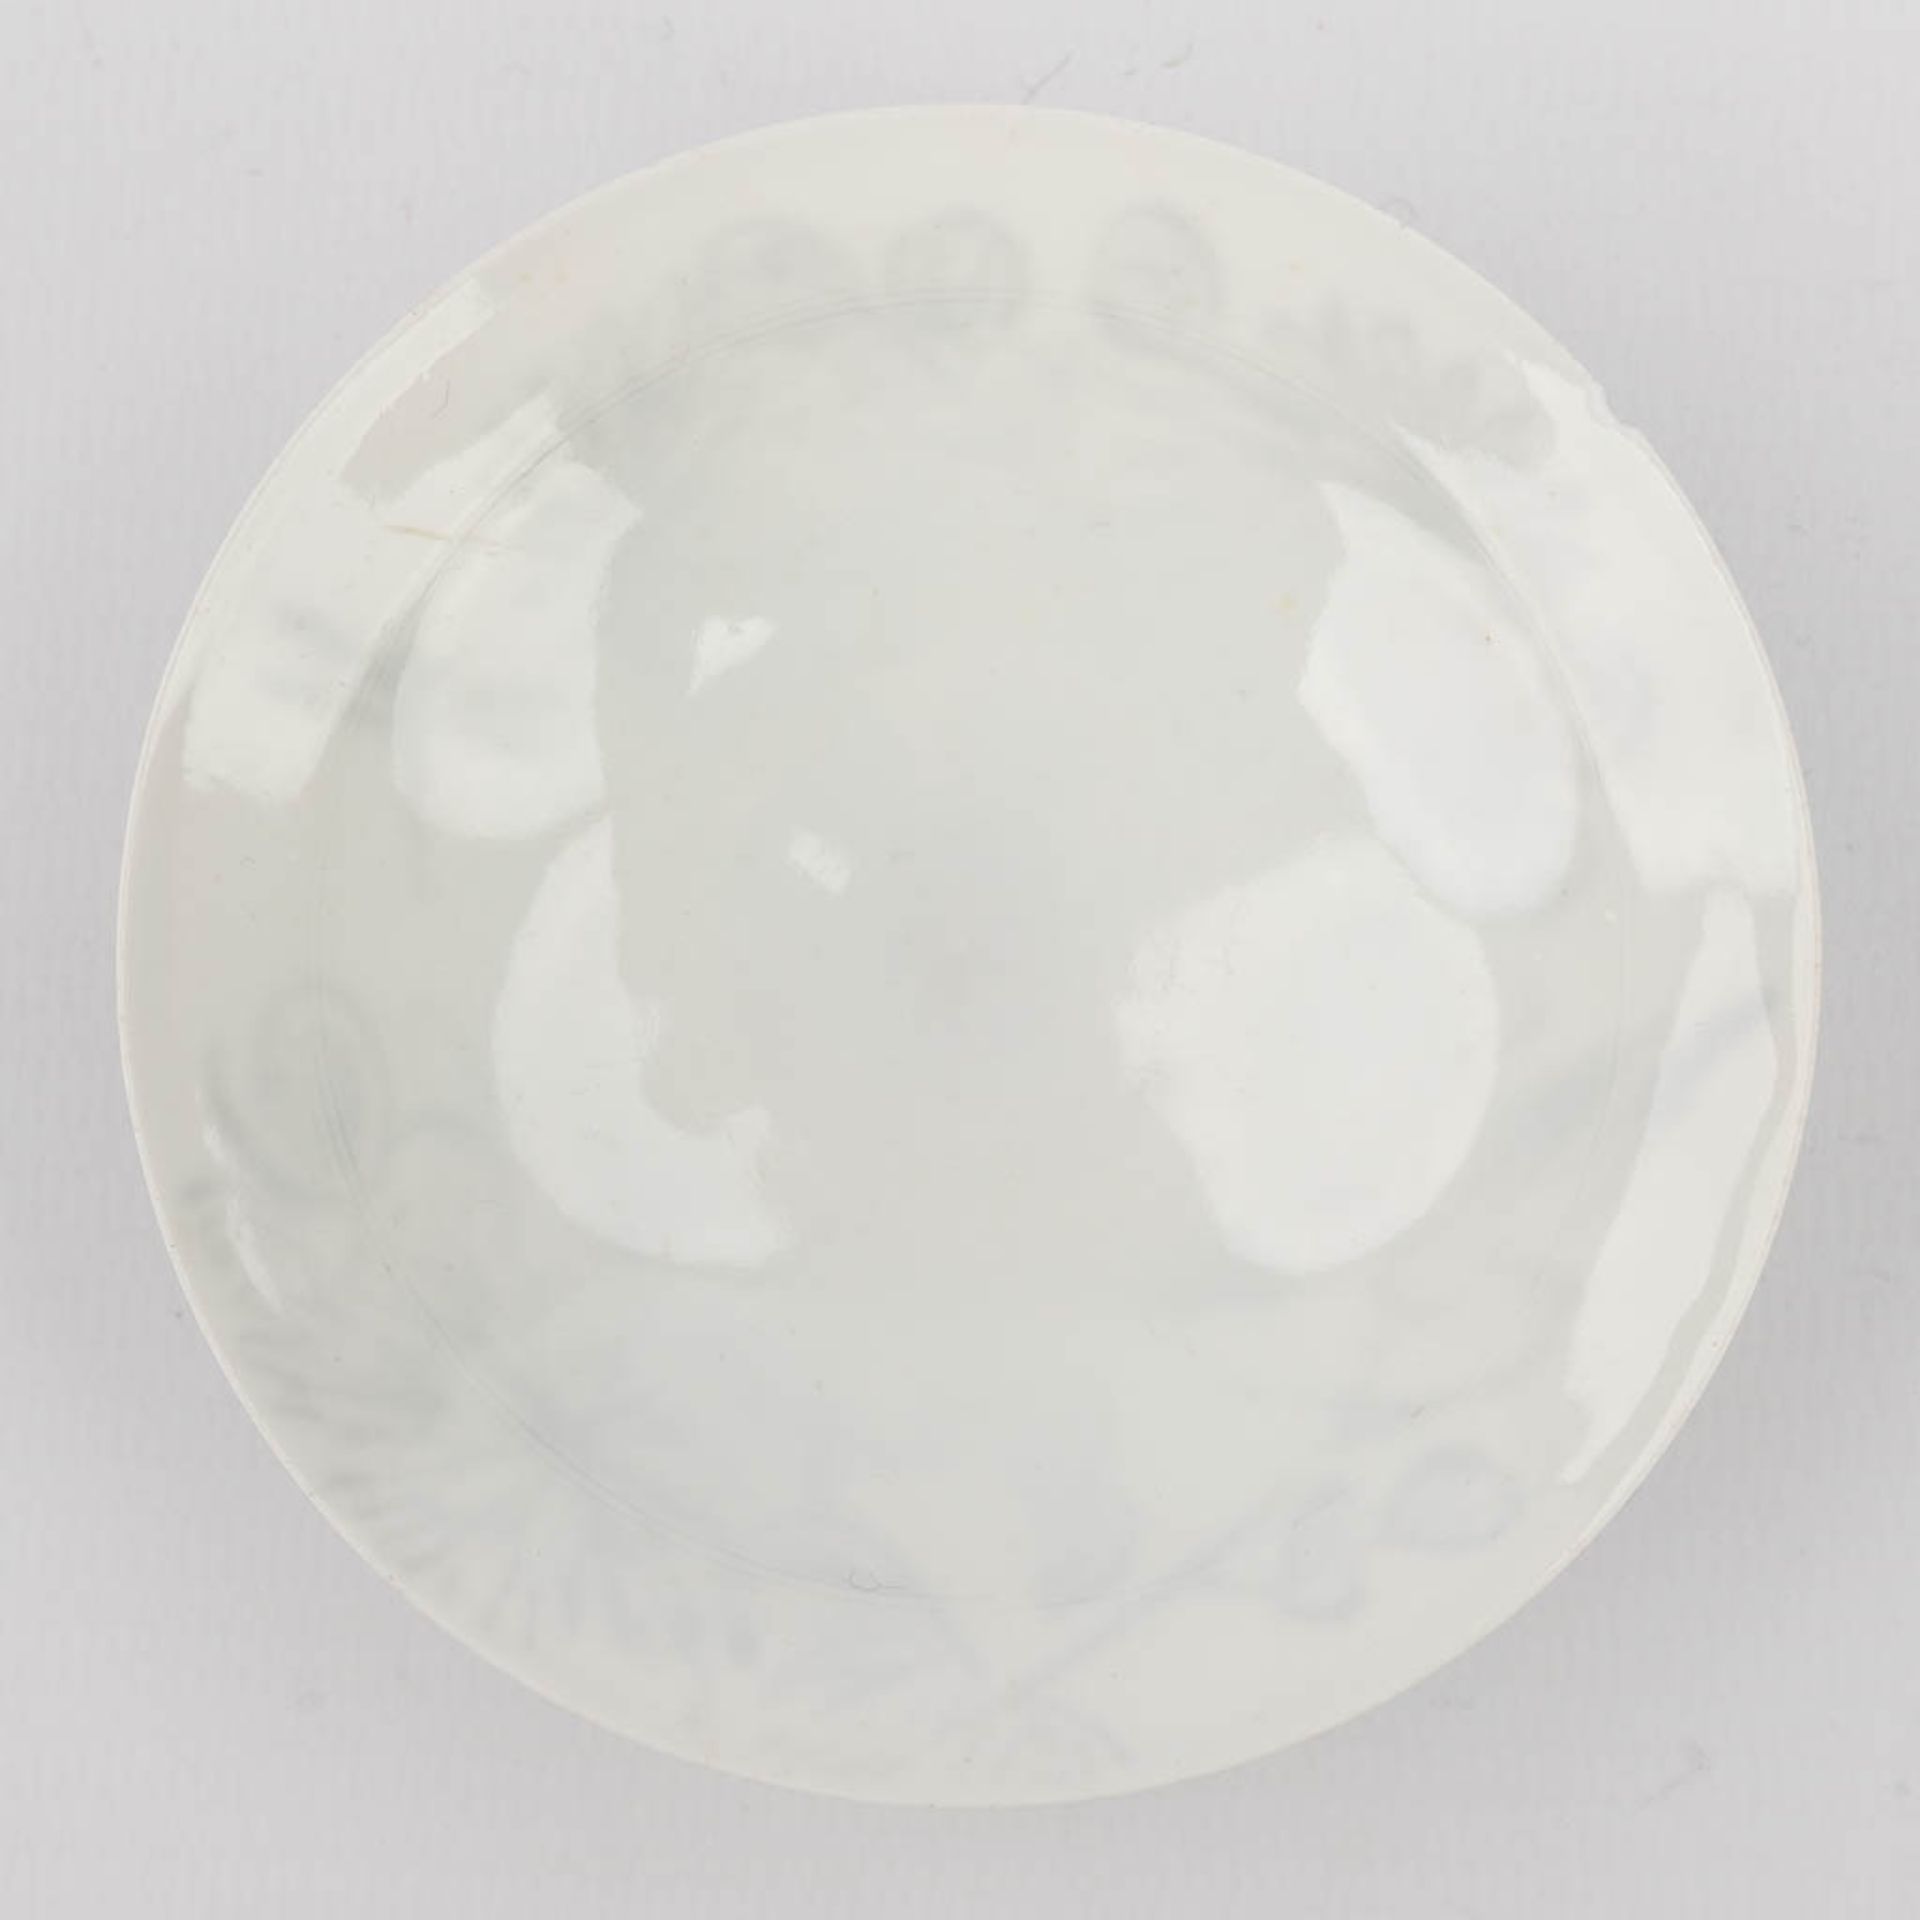 A large collection of bowls and saucers, eggshell porcelain, Japan, 20th C. (H:9 x D:9 cm) - Image 18 of 24